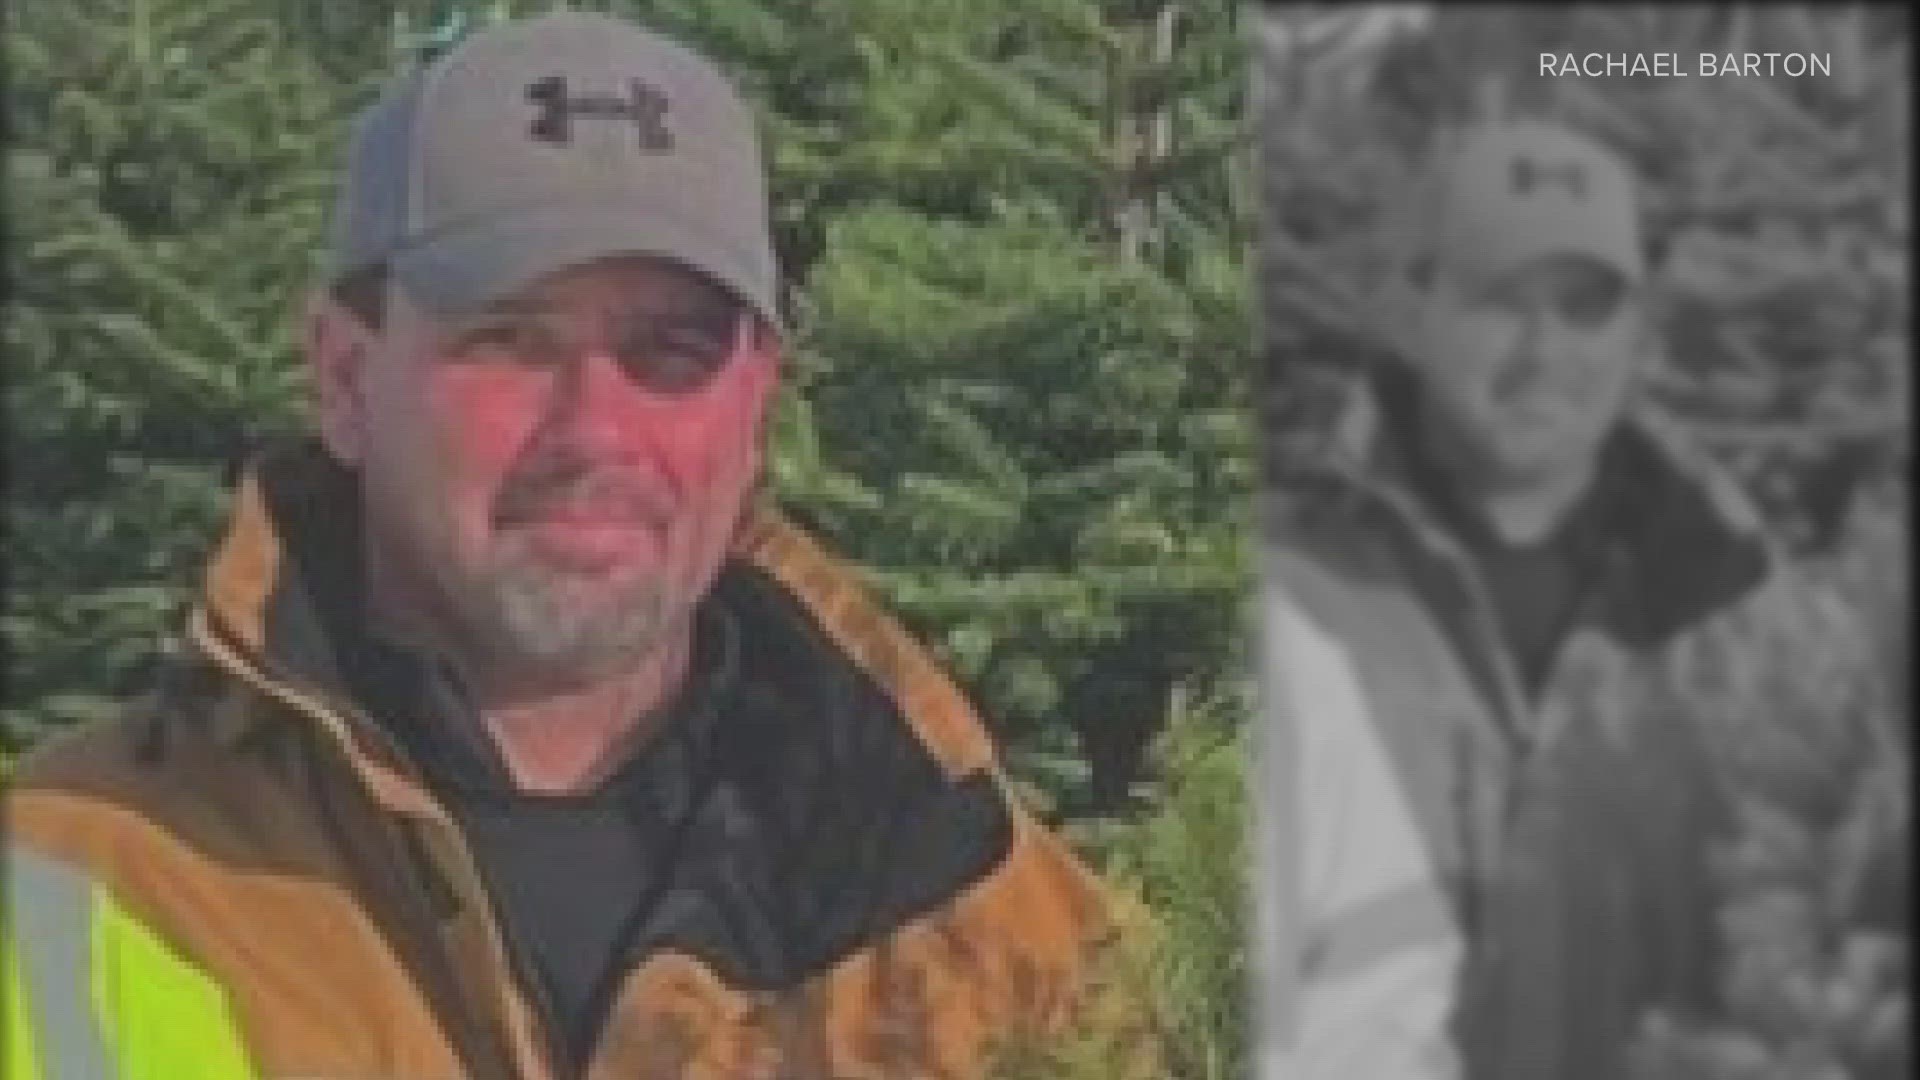 The family of Stephen Barton says the 54-year-old was last seen at his Rochester home Thursday. His vehicles, wallet and cellphone were still at the property.